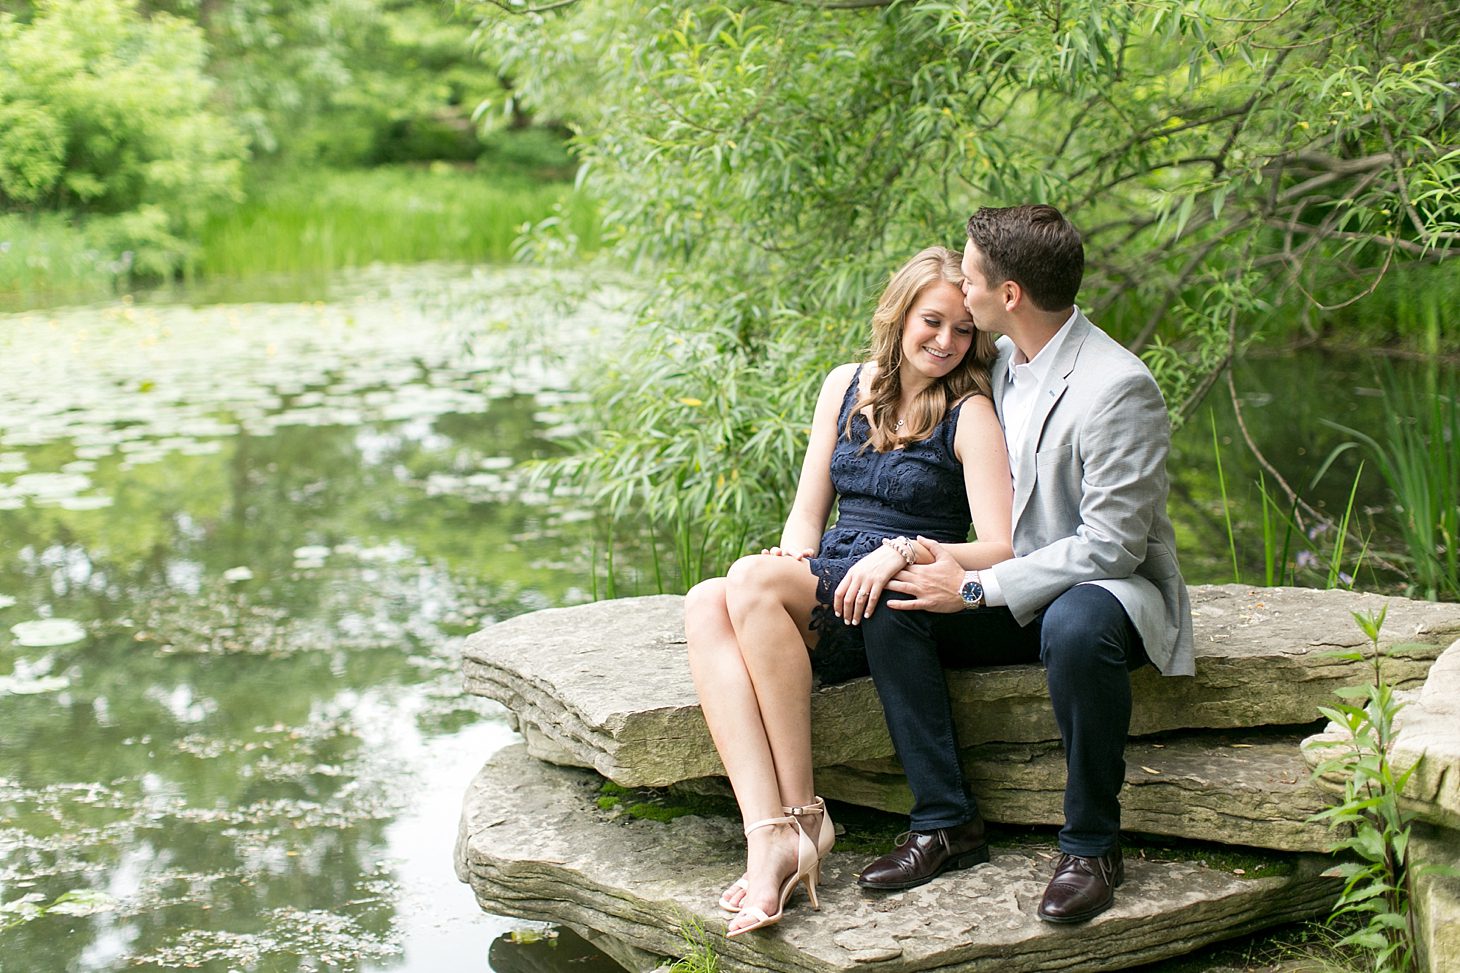 Lily Pool Engagement Photos Chicago_0012